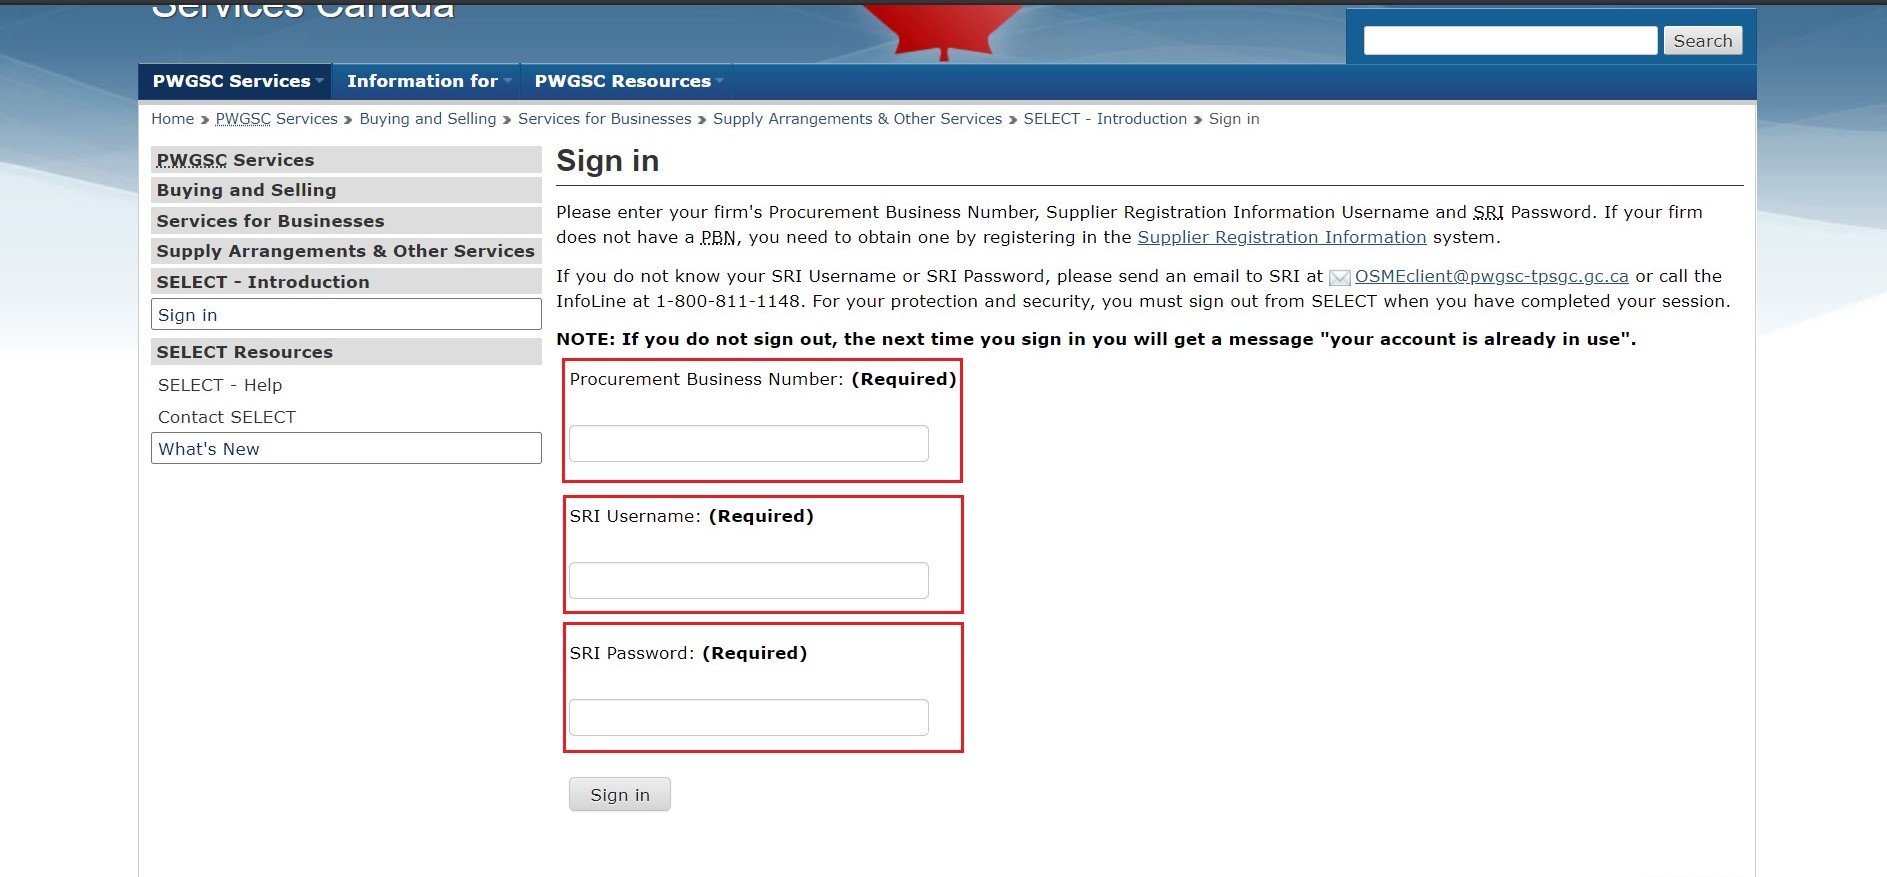 A screenshot of the sign in page of the SELECT website, with the fields Procurement Business Number, SRI Username and SRI Password highlighted.